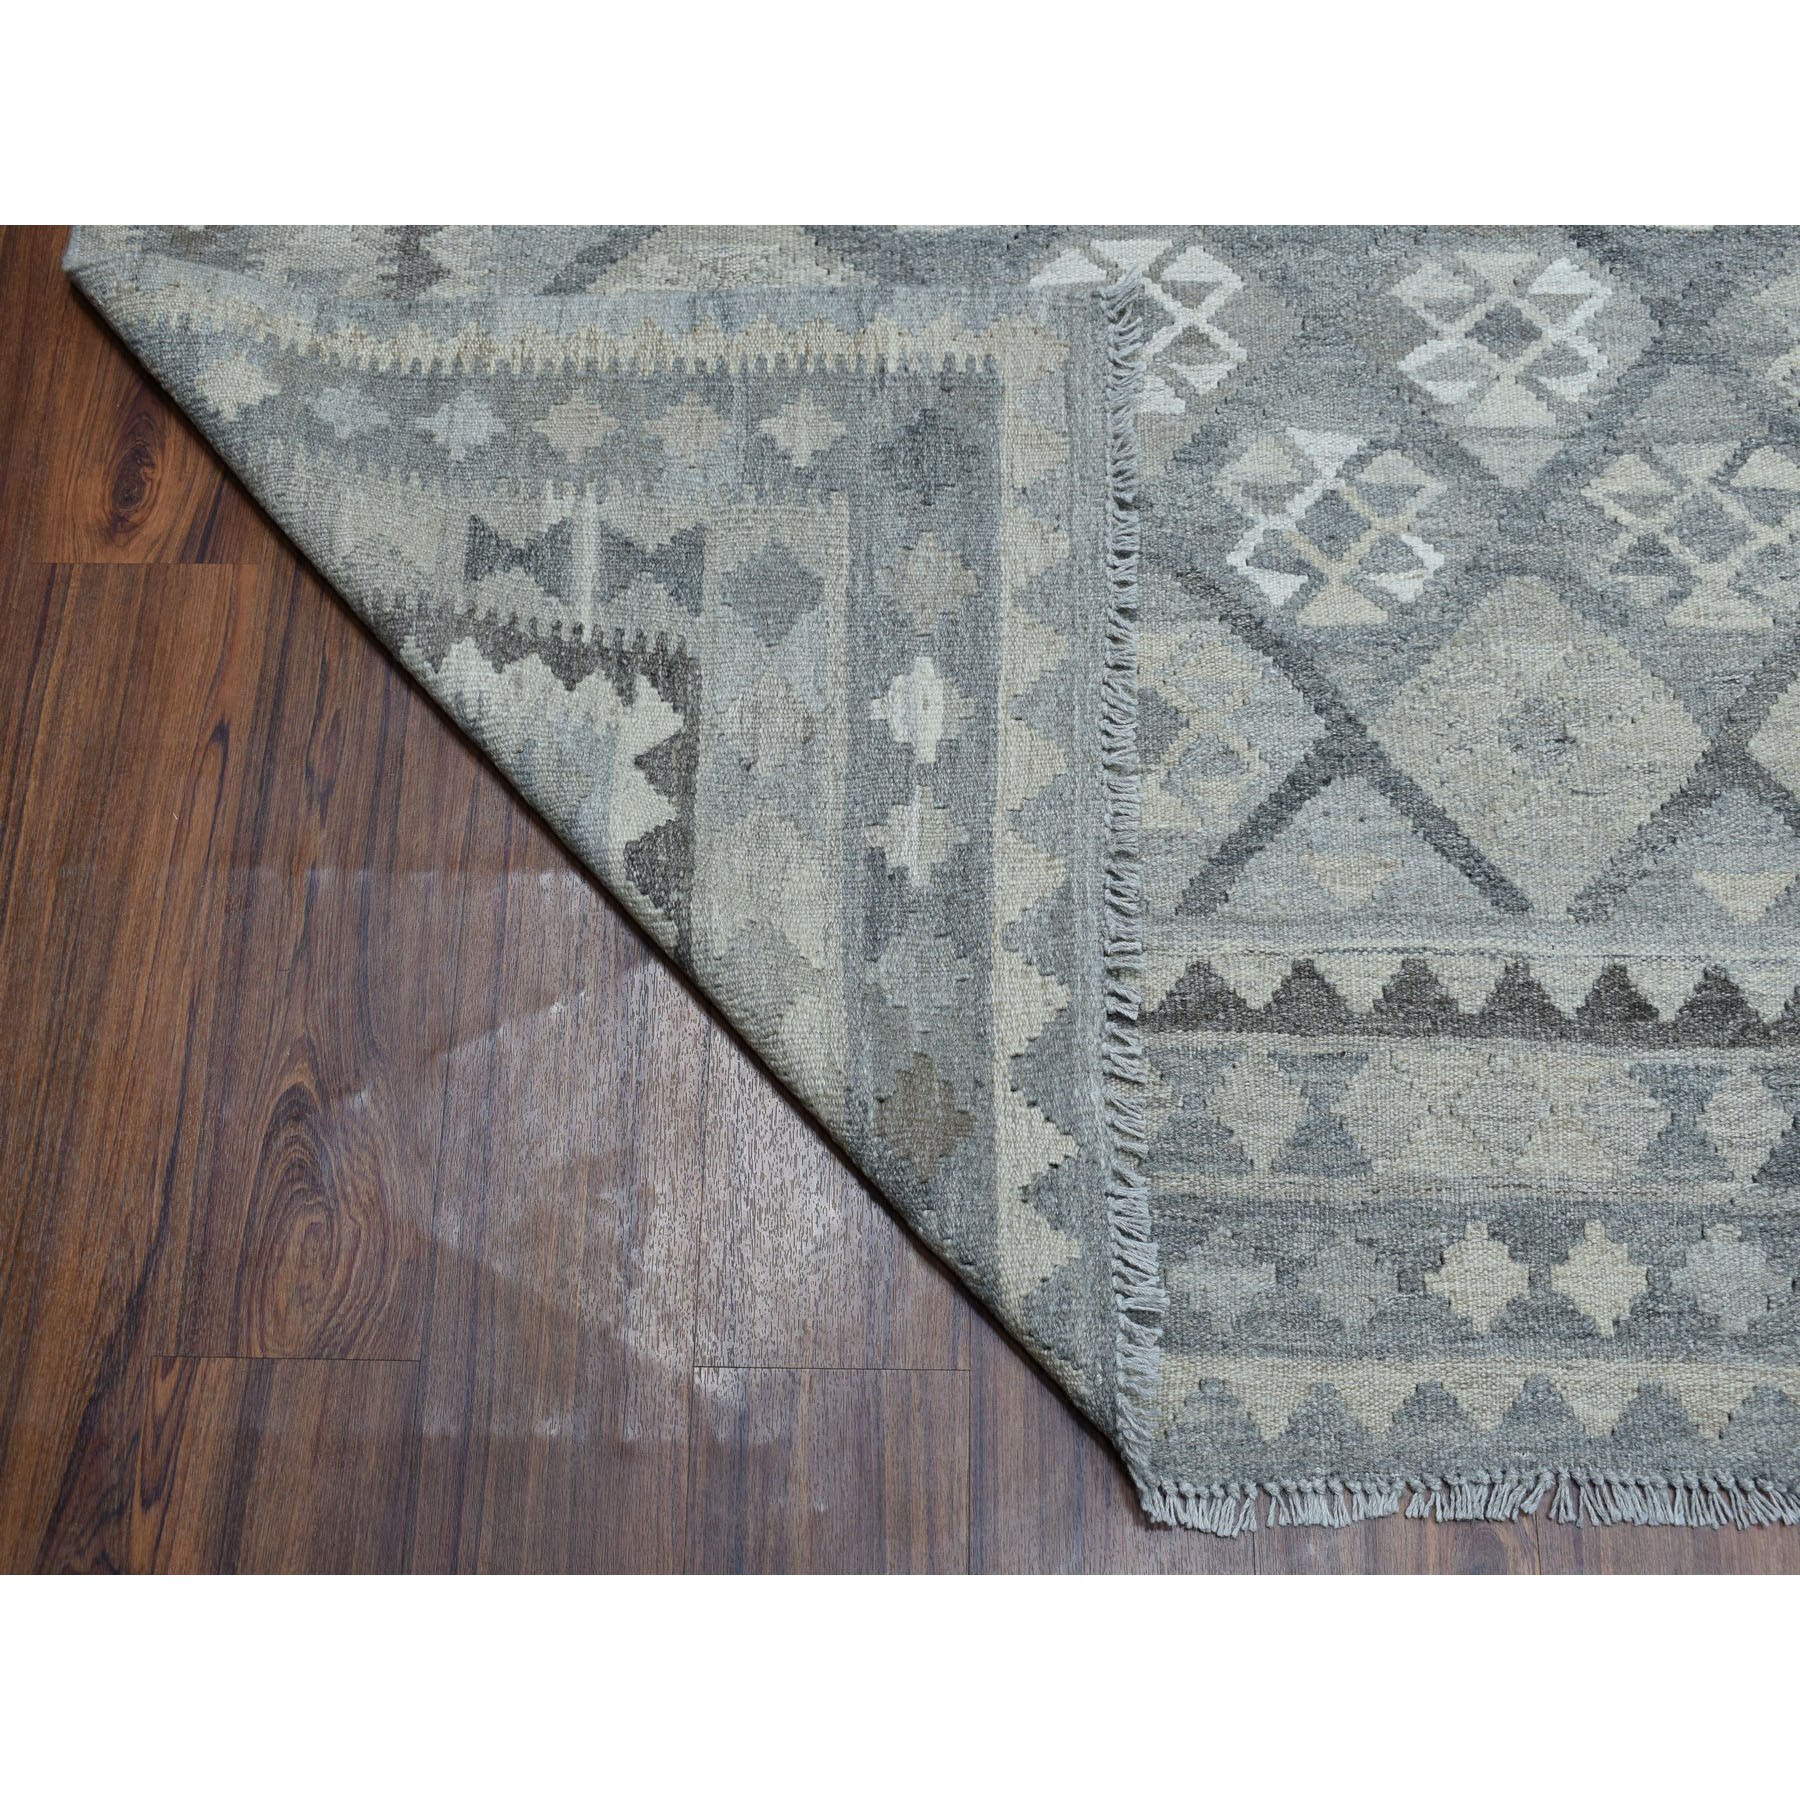 8-4 x10- Undyed Natural Wool Afghan Kilim Reversible Hand Woven Oriental Rug 